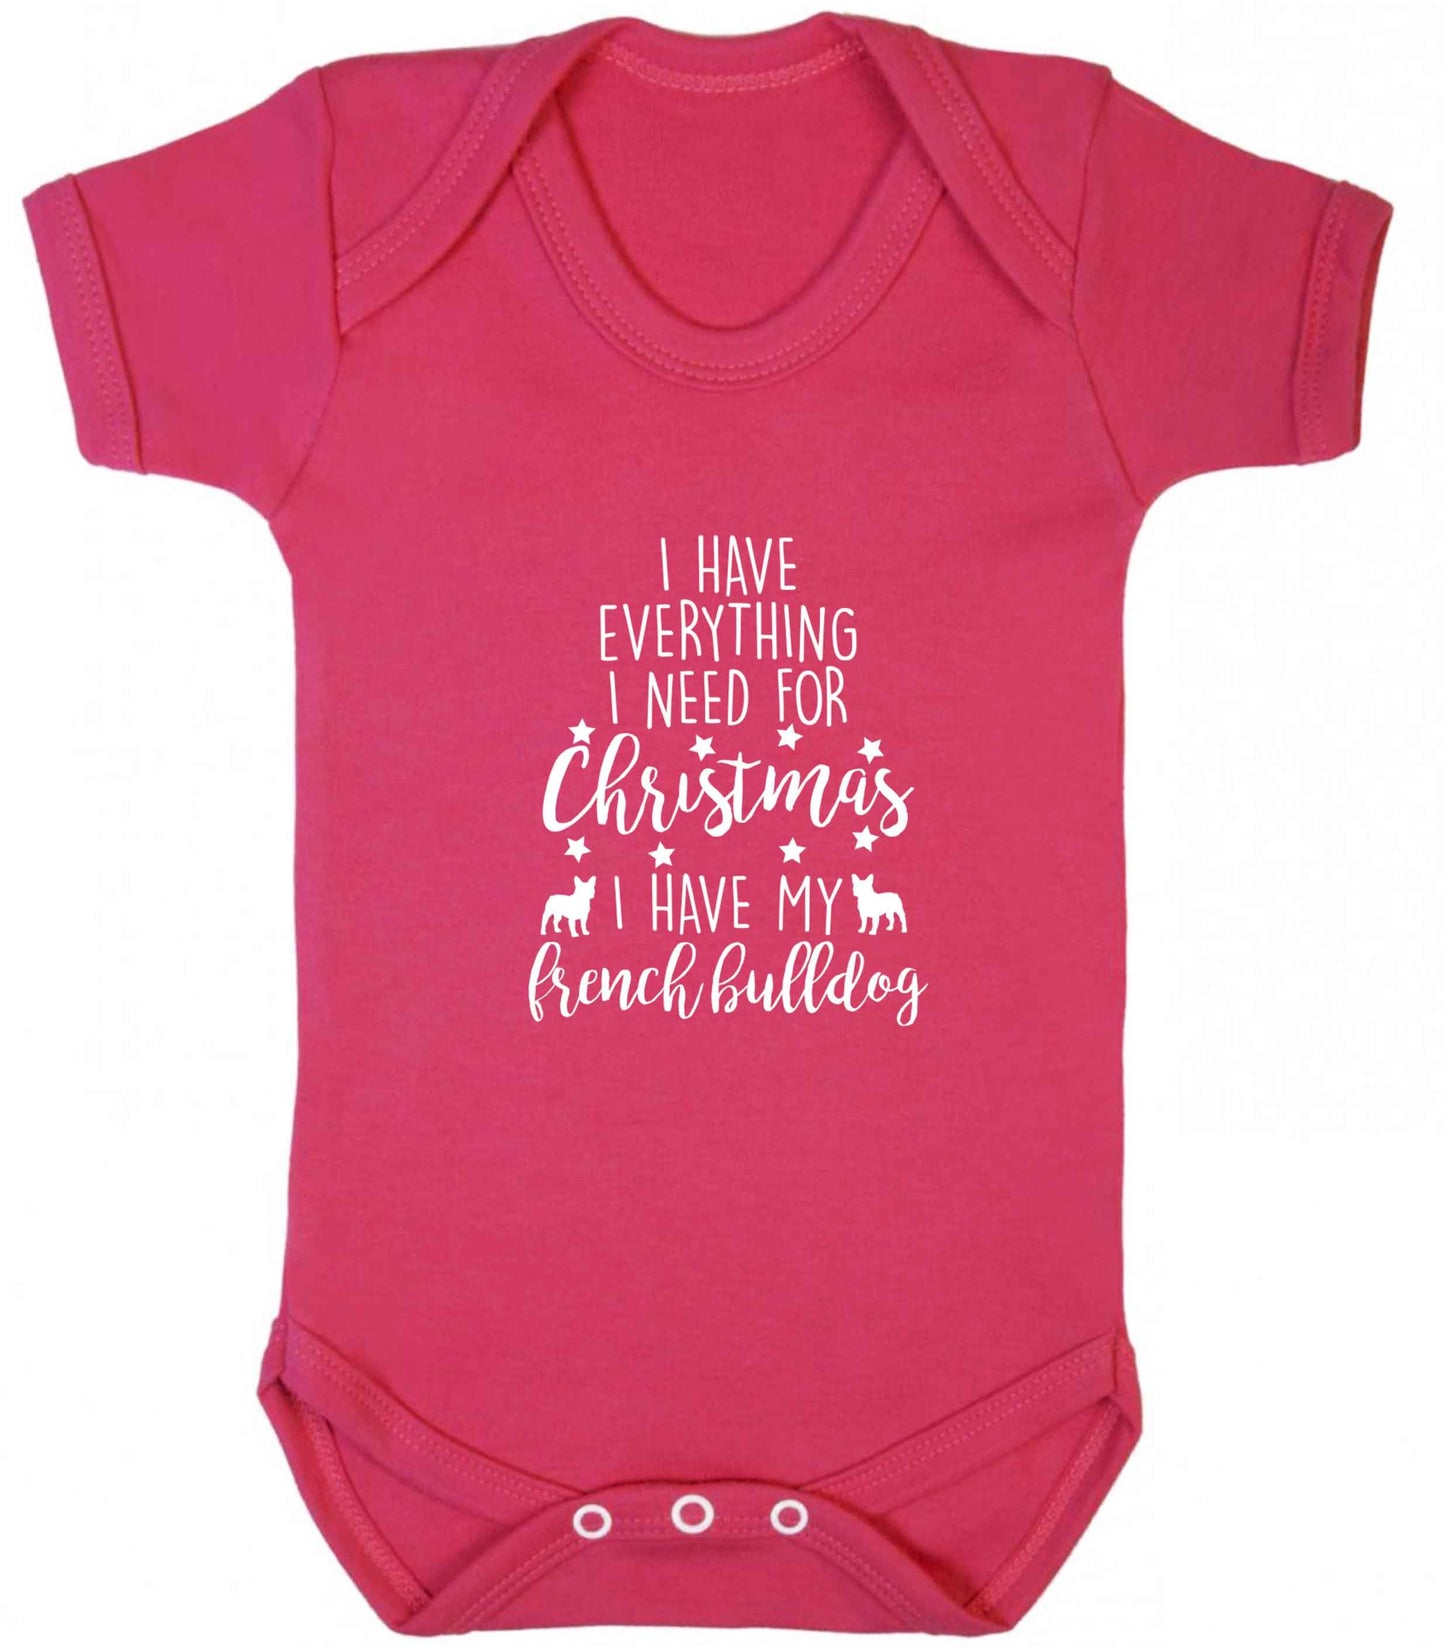 I have everything I need for Christmas I have my french bulldog baby vest dark pink 18-24 months